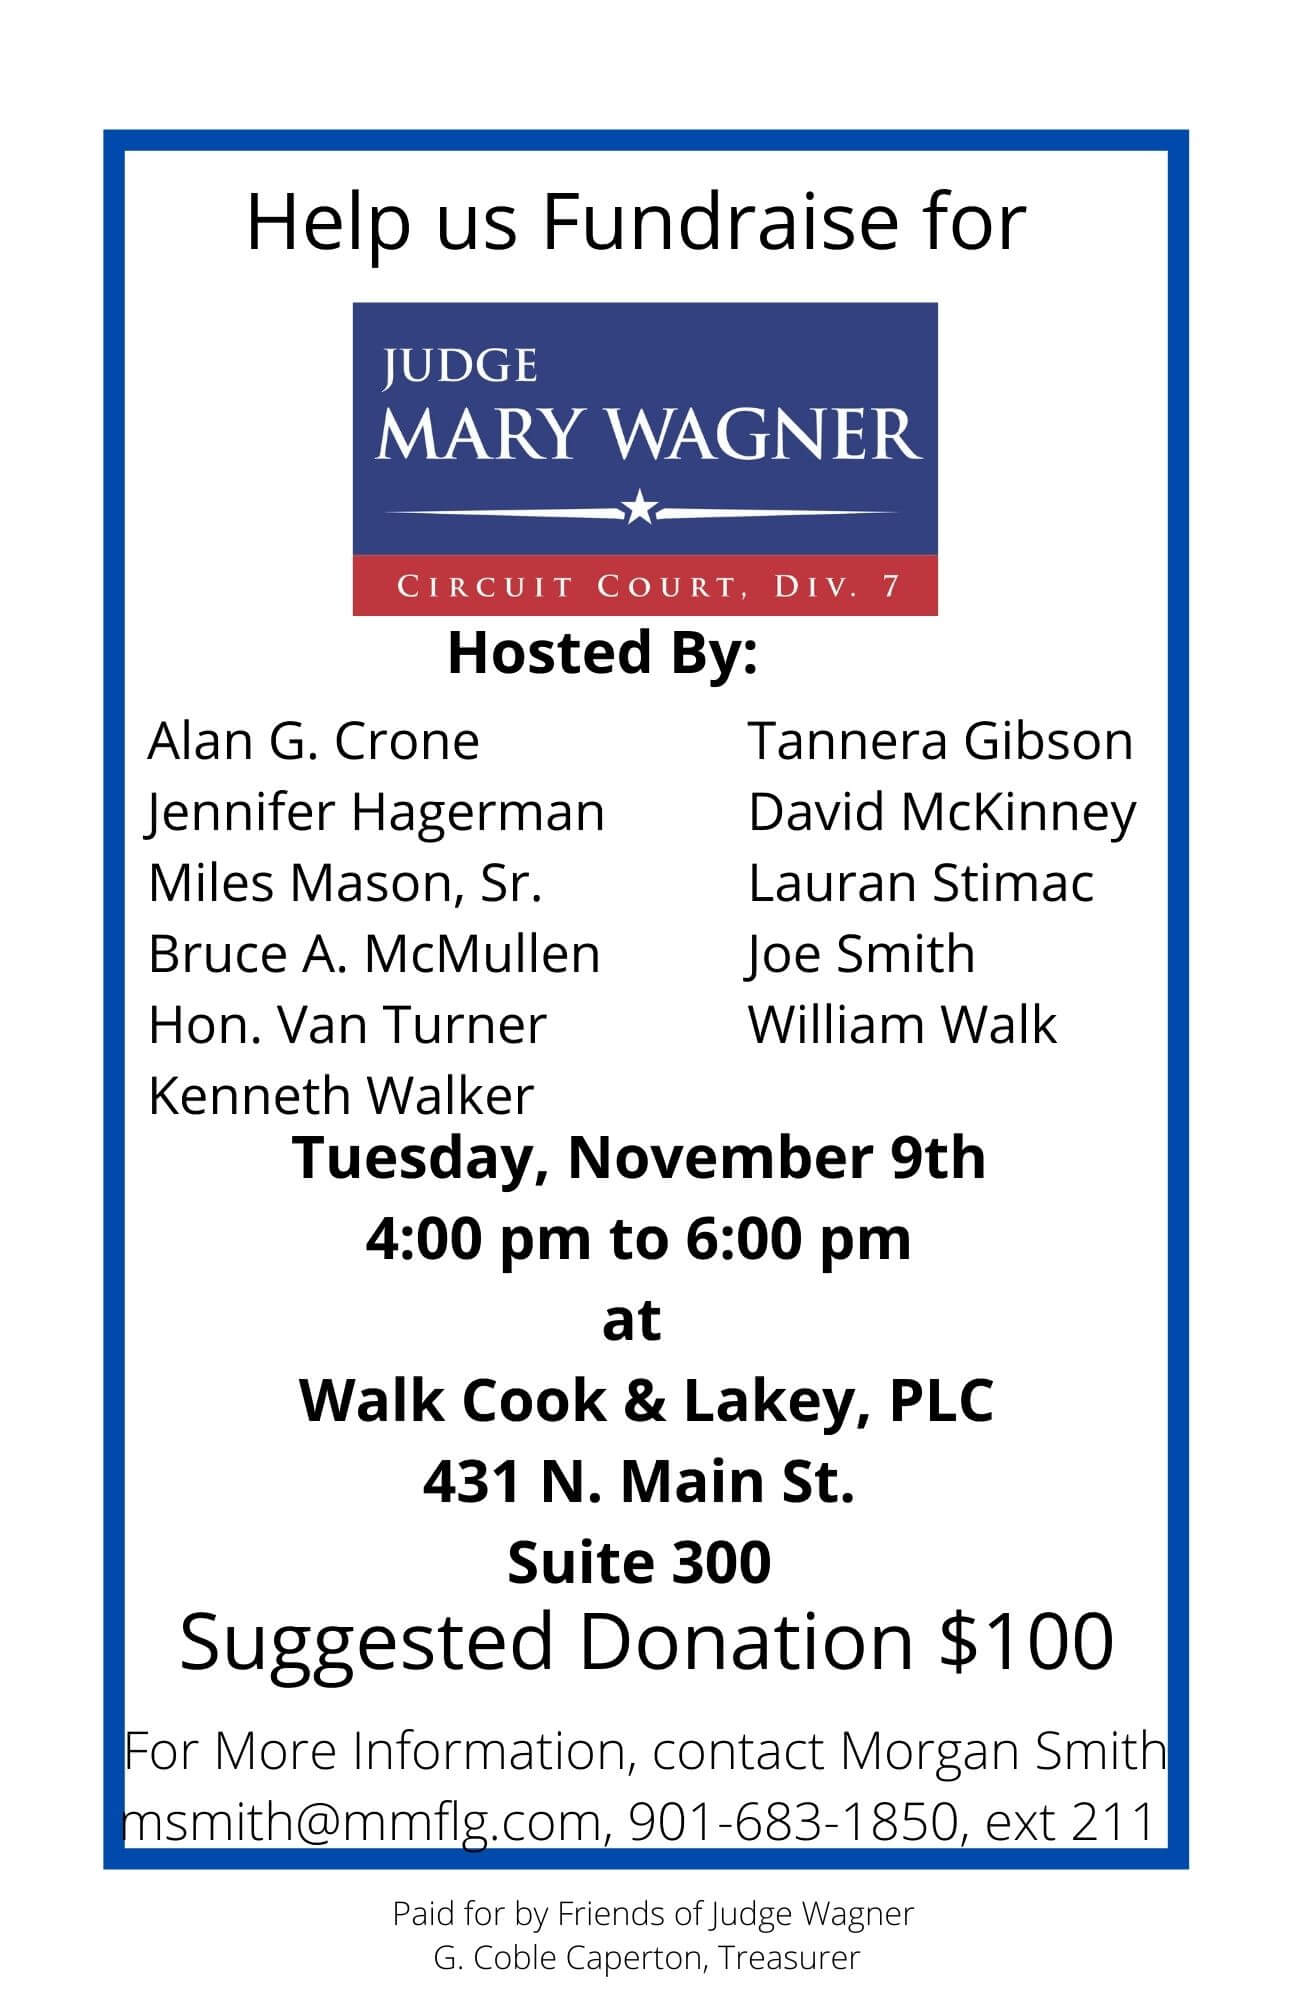 Judge Mary Wagner Re-election Event